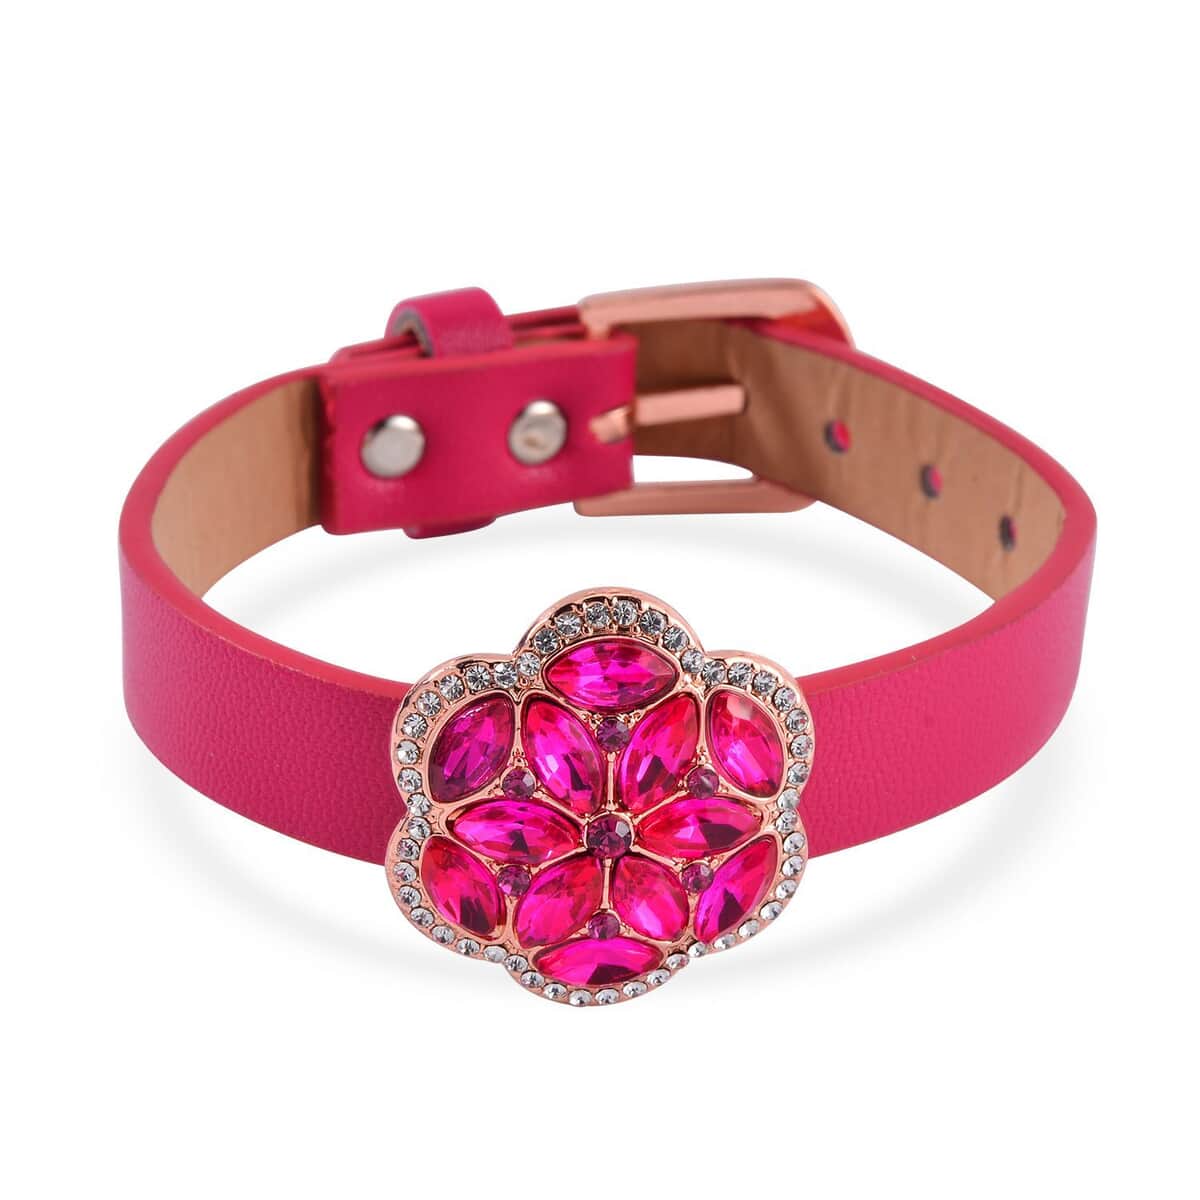 Fuchsia and White Austrian Crystal, Faux Leather Floral Bracelet (6-8In), Earrings, Ring (Size 6.0) and Pendant Necklace 20-22 Inches in Rosetone image number 3